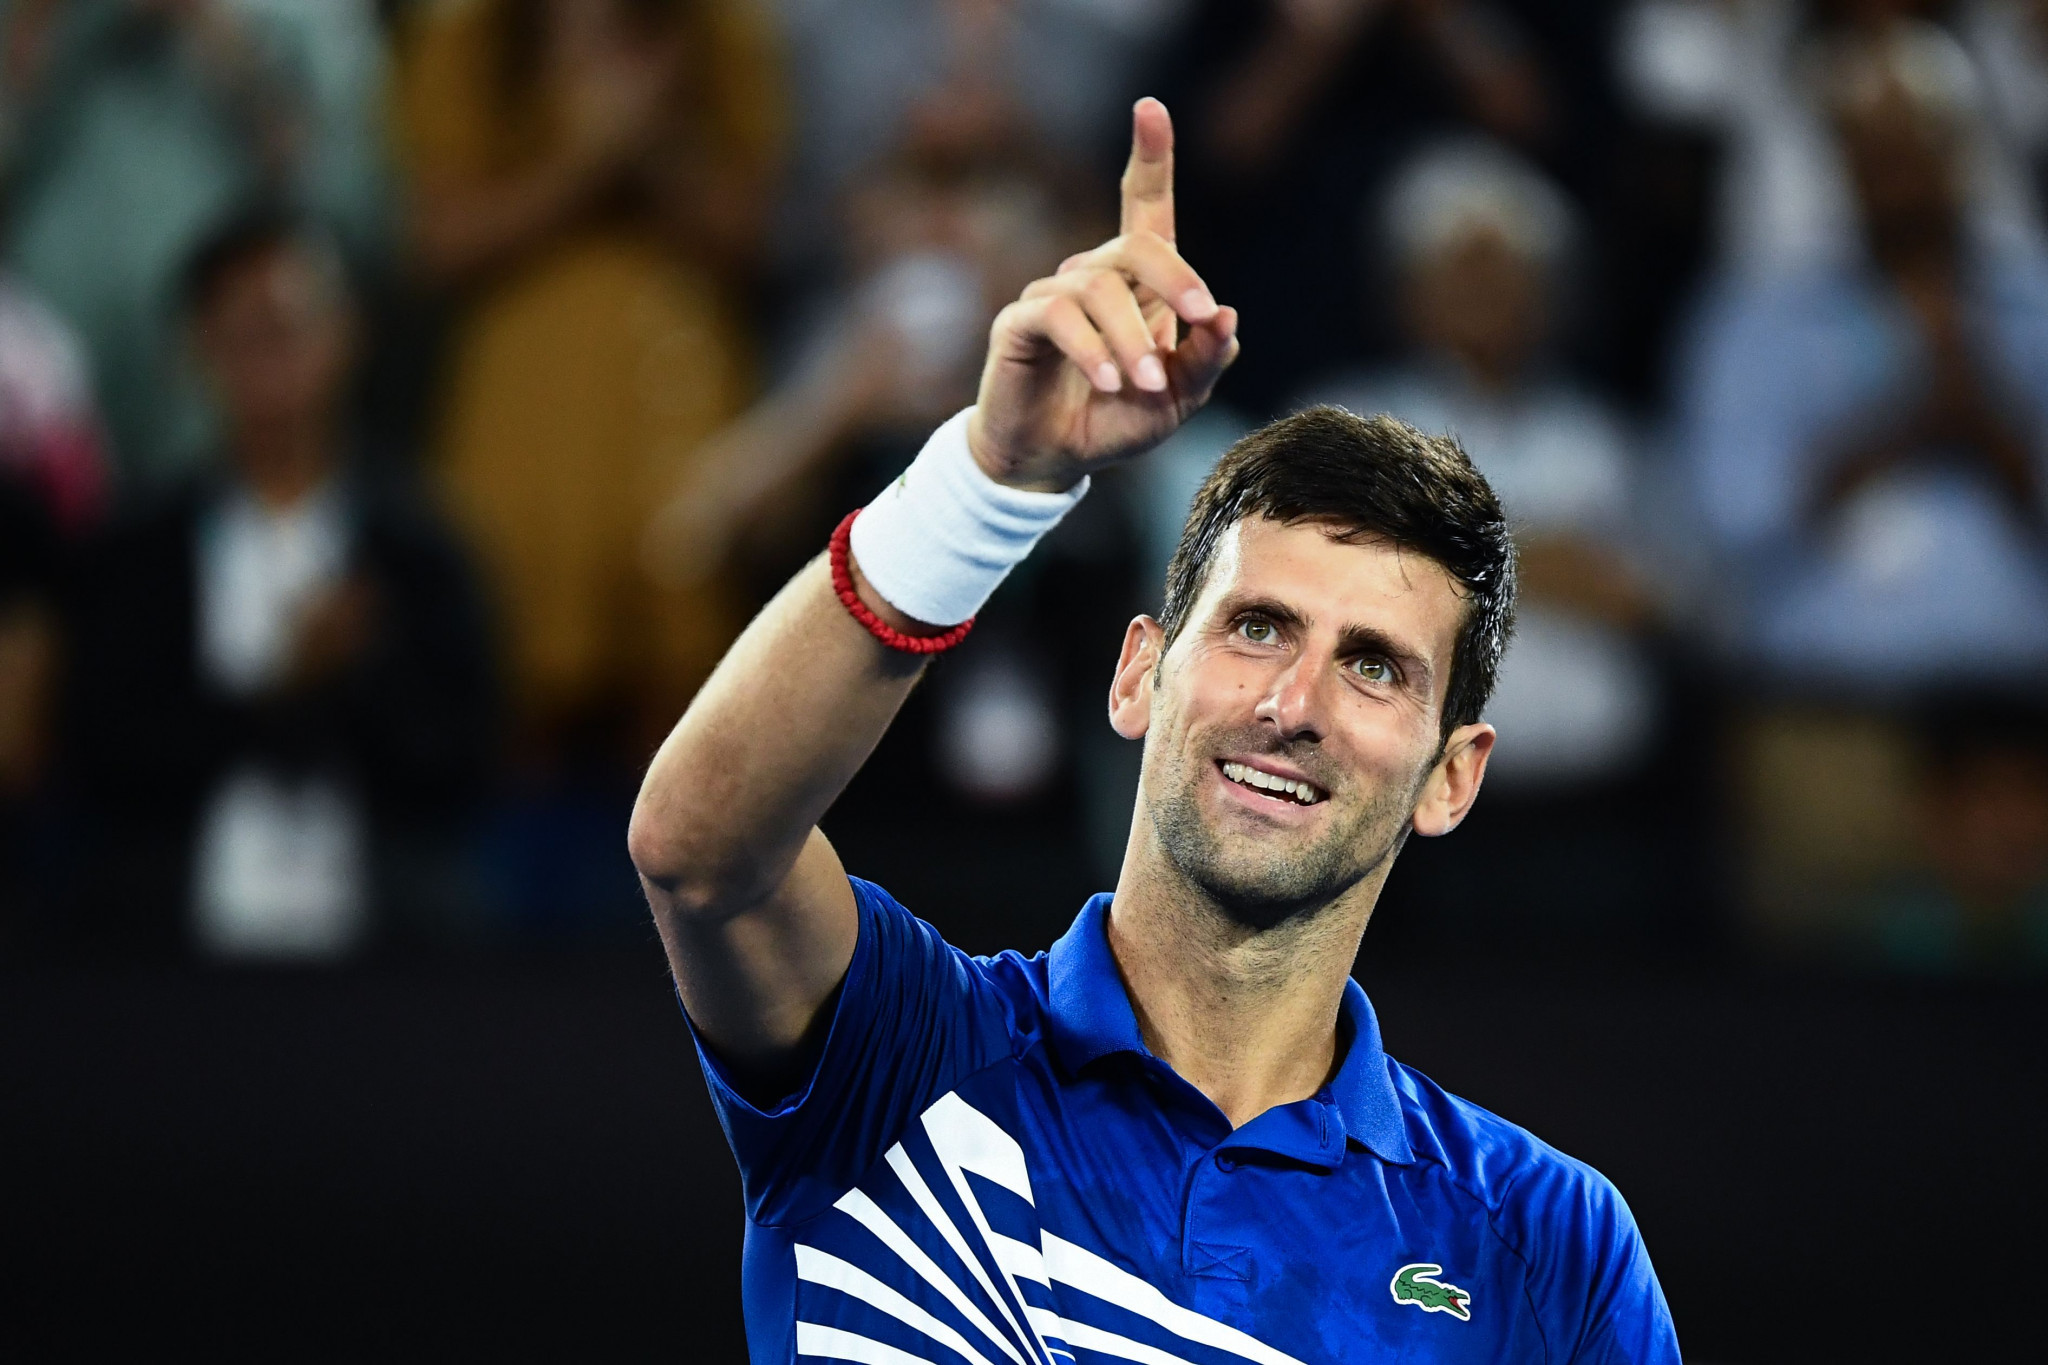 Novak Djokovic eased into the men's singles final at the Australian Open ©Getty Images